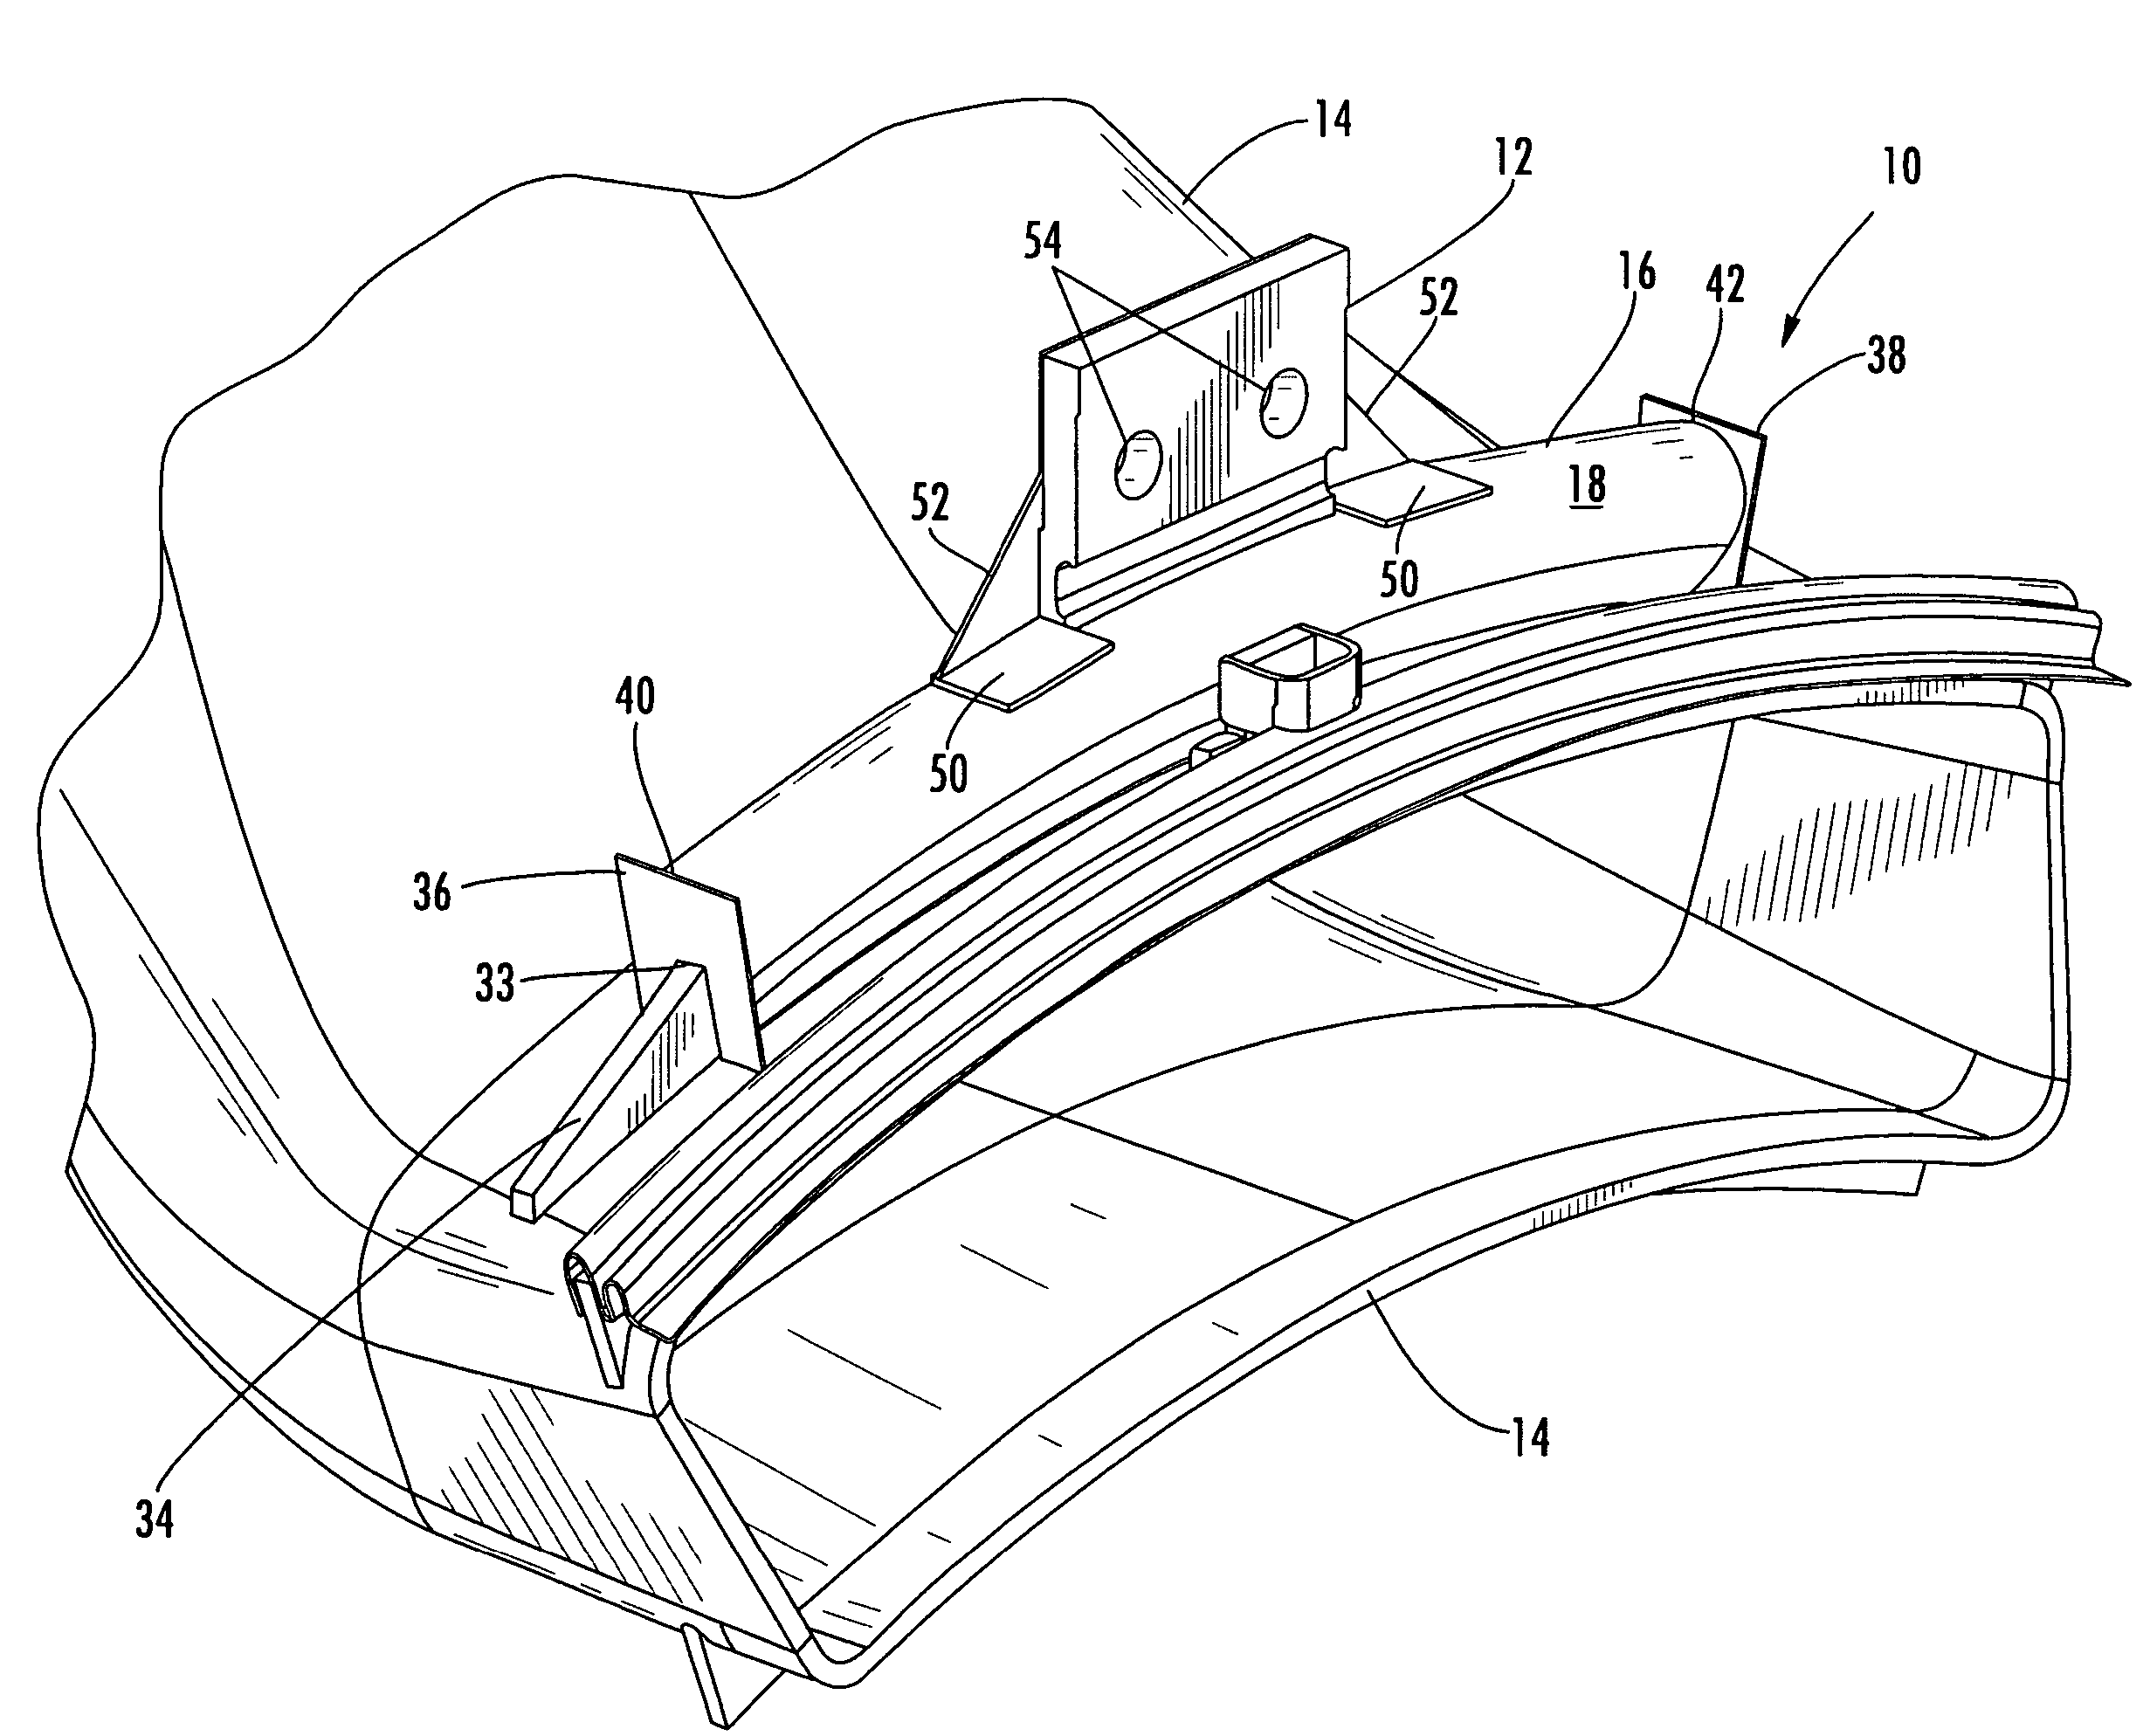 Cooling system for a transition bracket of a transition in a turbine engine